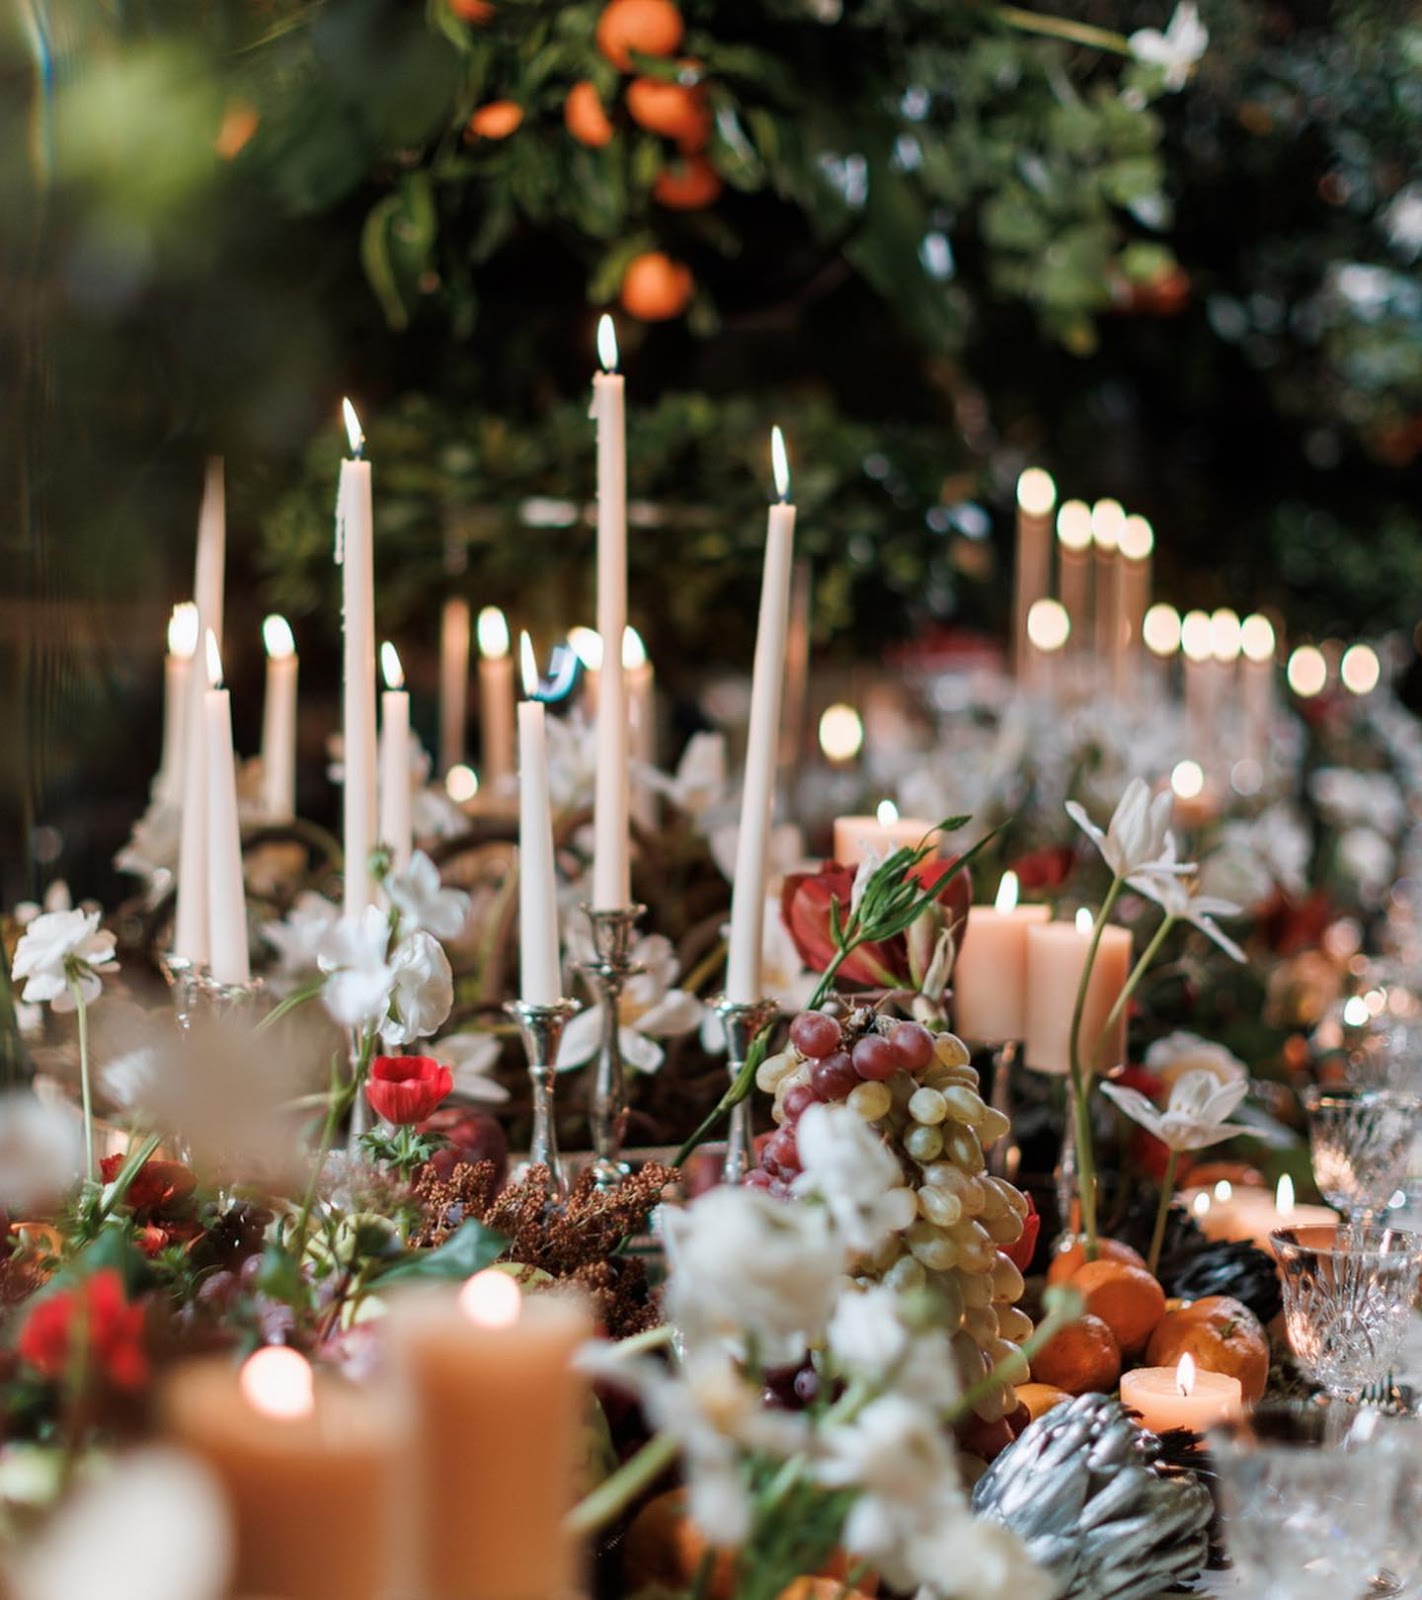 Trending: The Organic Elegance of Fruits, Florals, and Greenery in Wedding Tablescapes